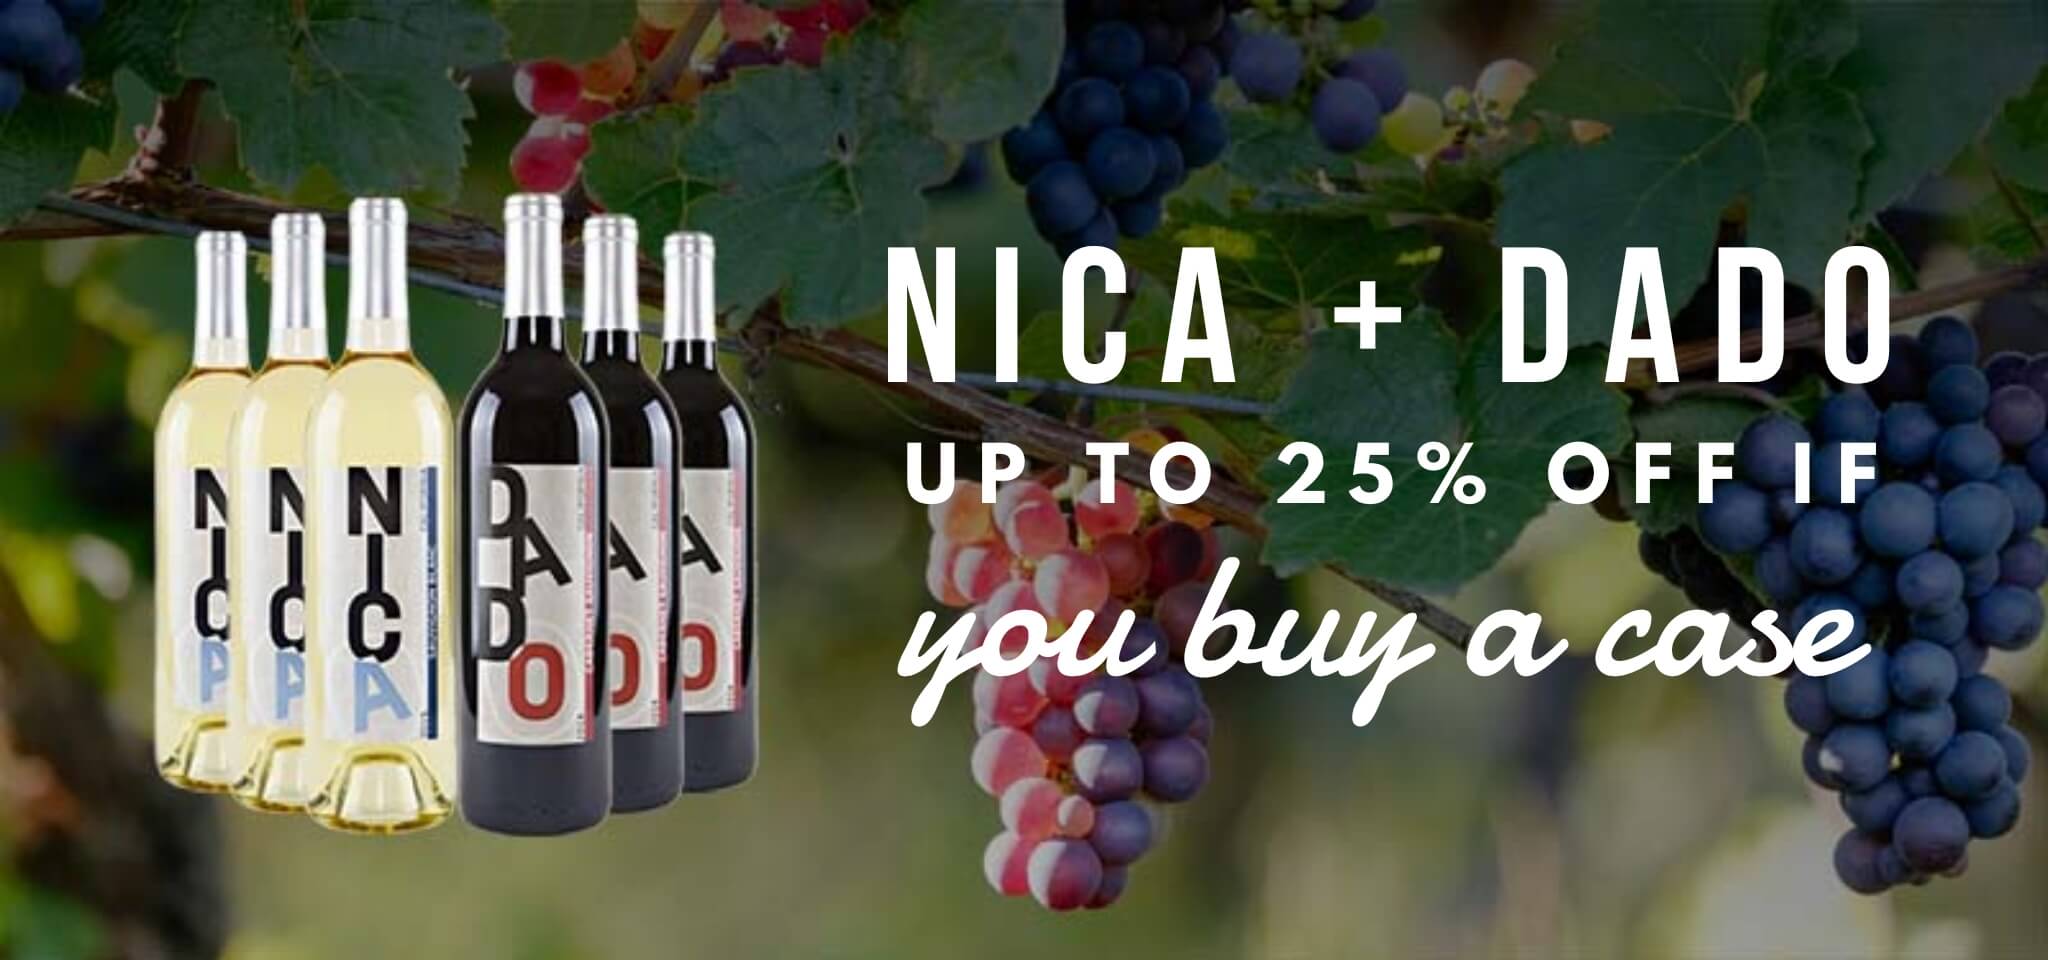 Nica and Dado - Buy Napa Valley Wines in the Philippines